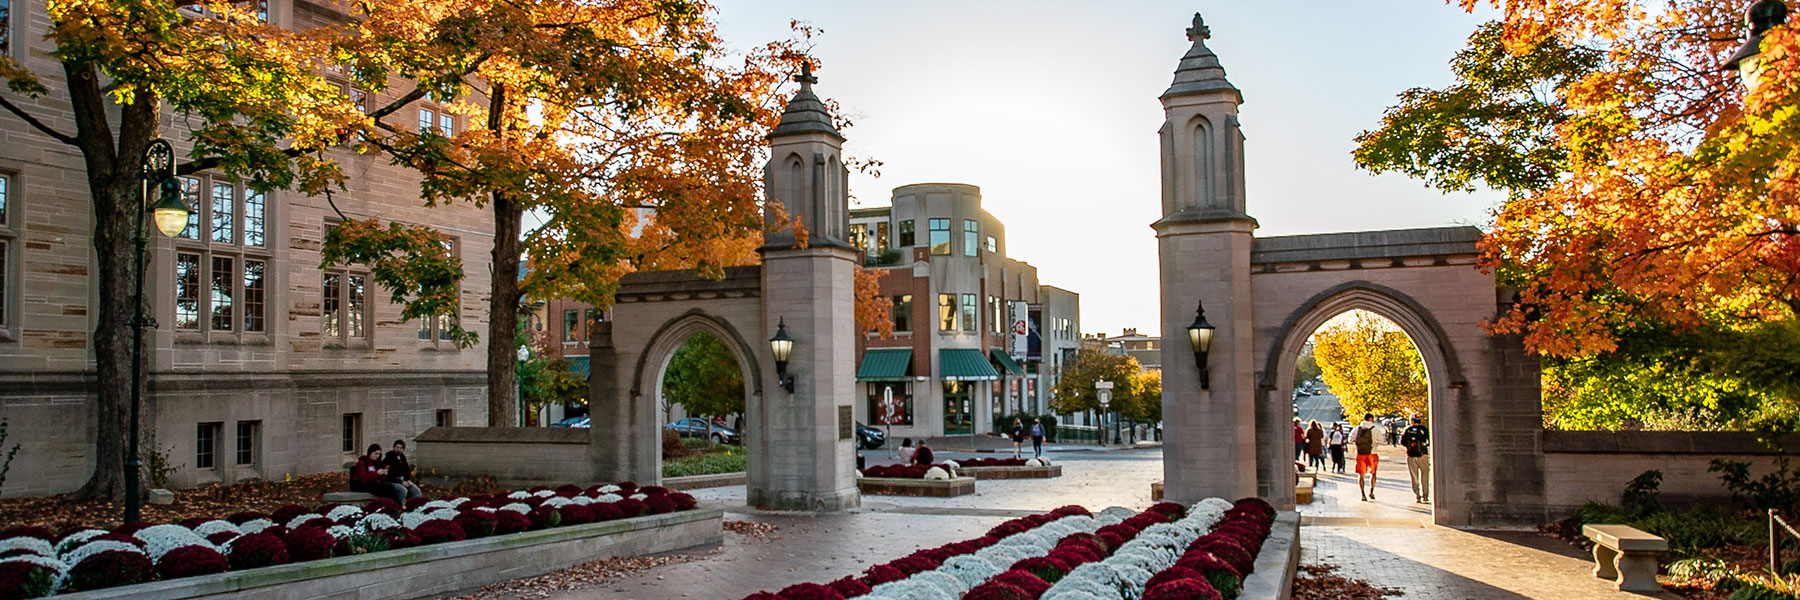 Looking through the Sample Gates onto Kirkwood in autumn with students coming and going.